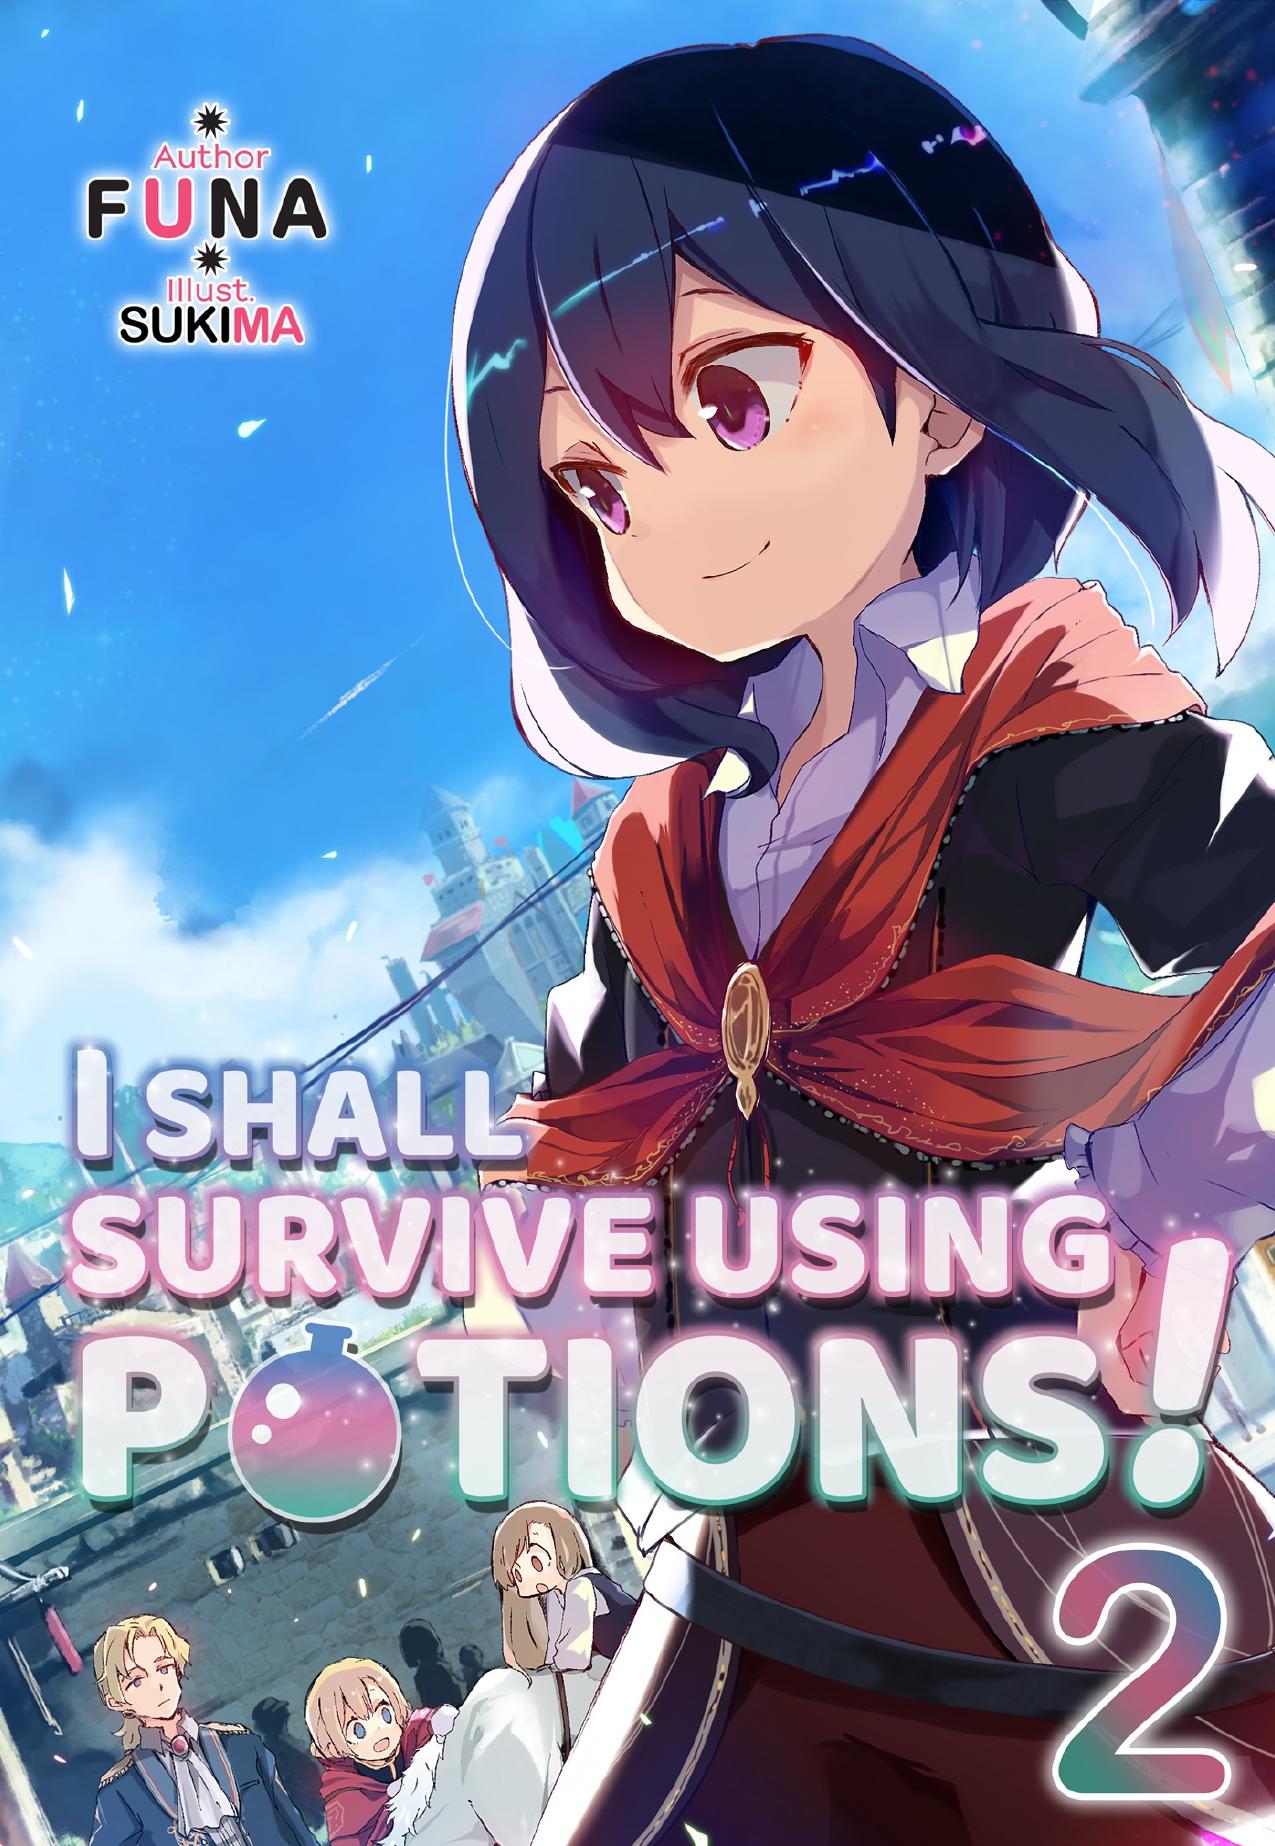 I Shall Survive Using Potions! Volume 2 by FUNA